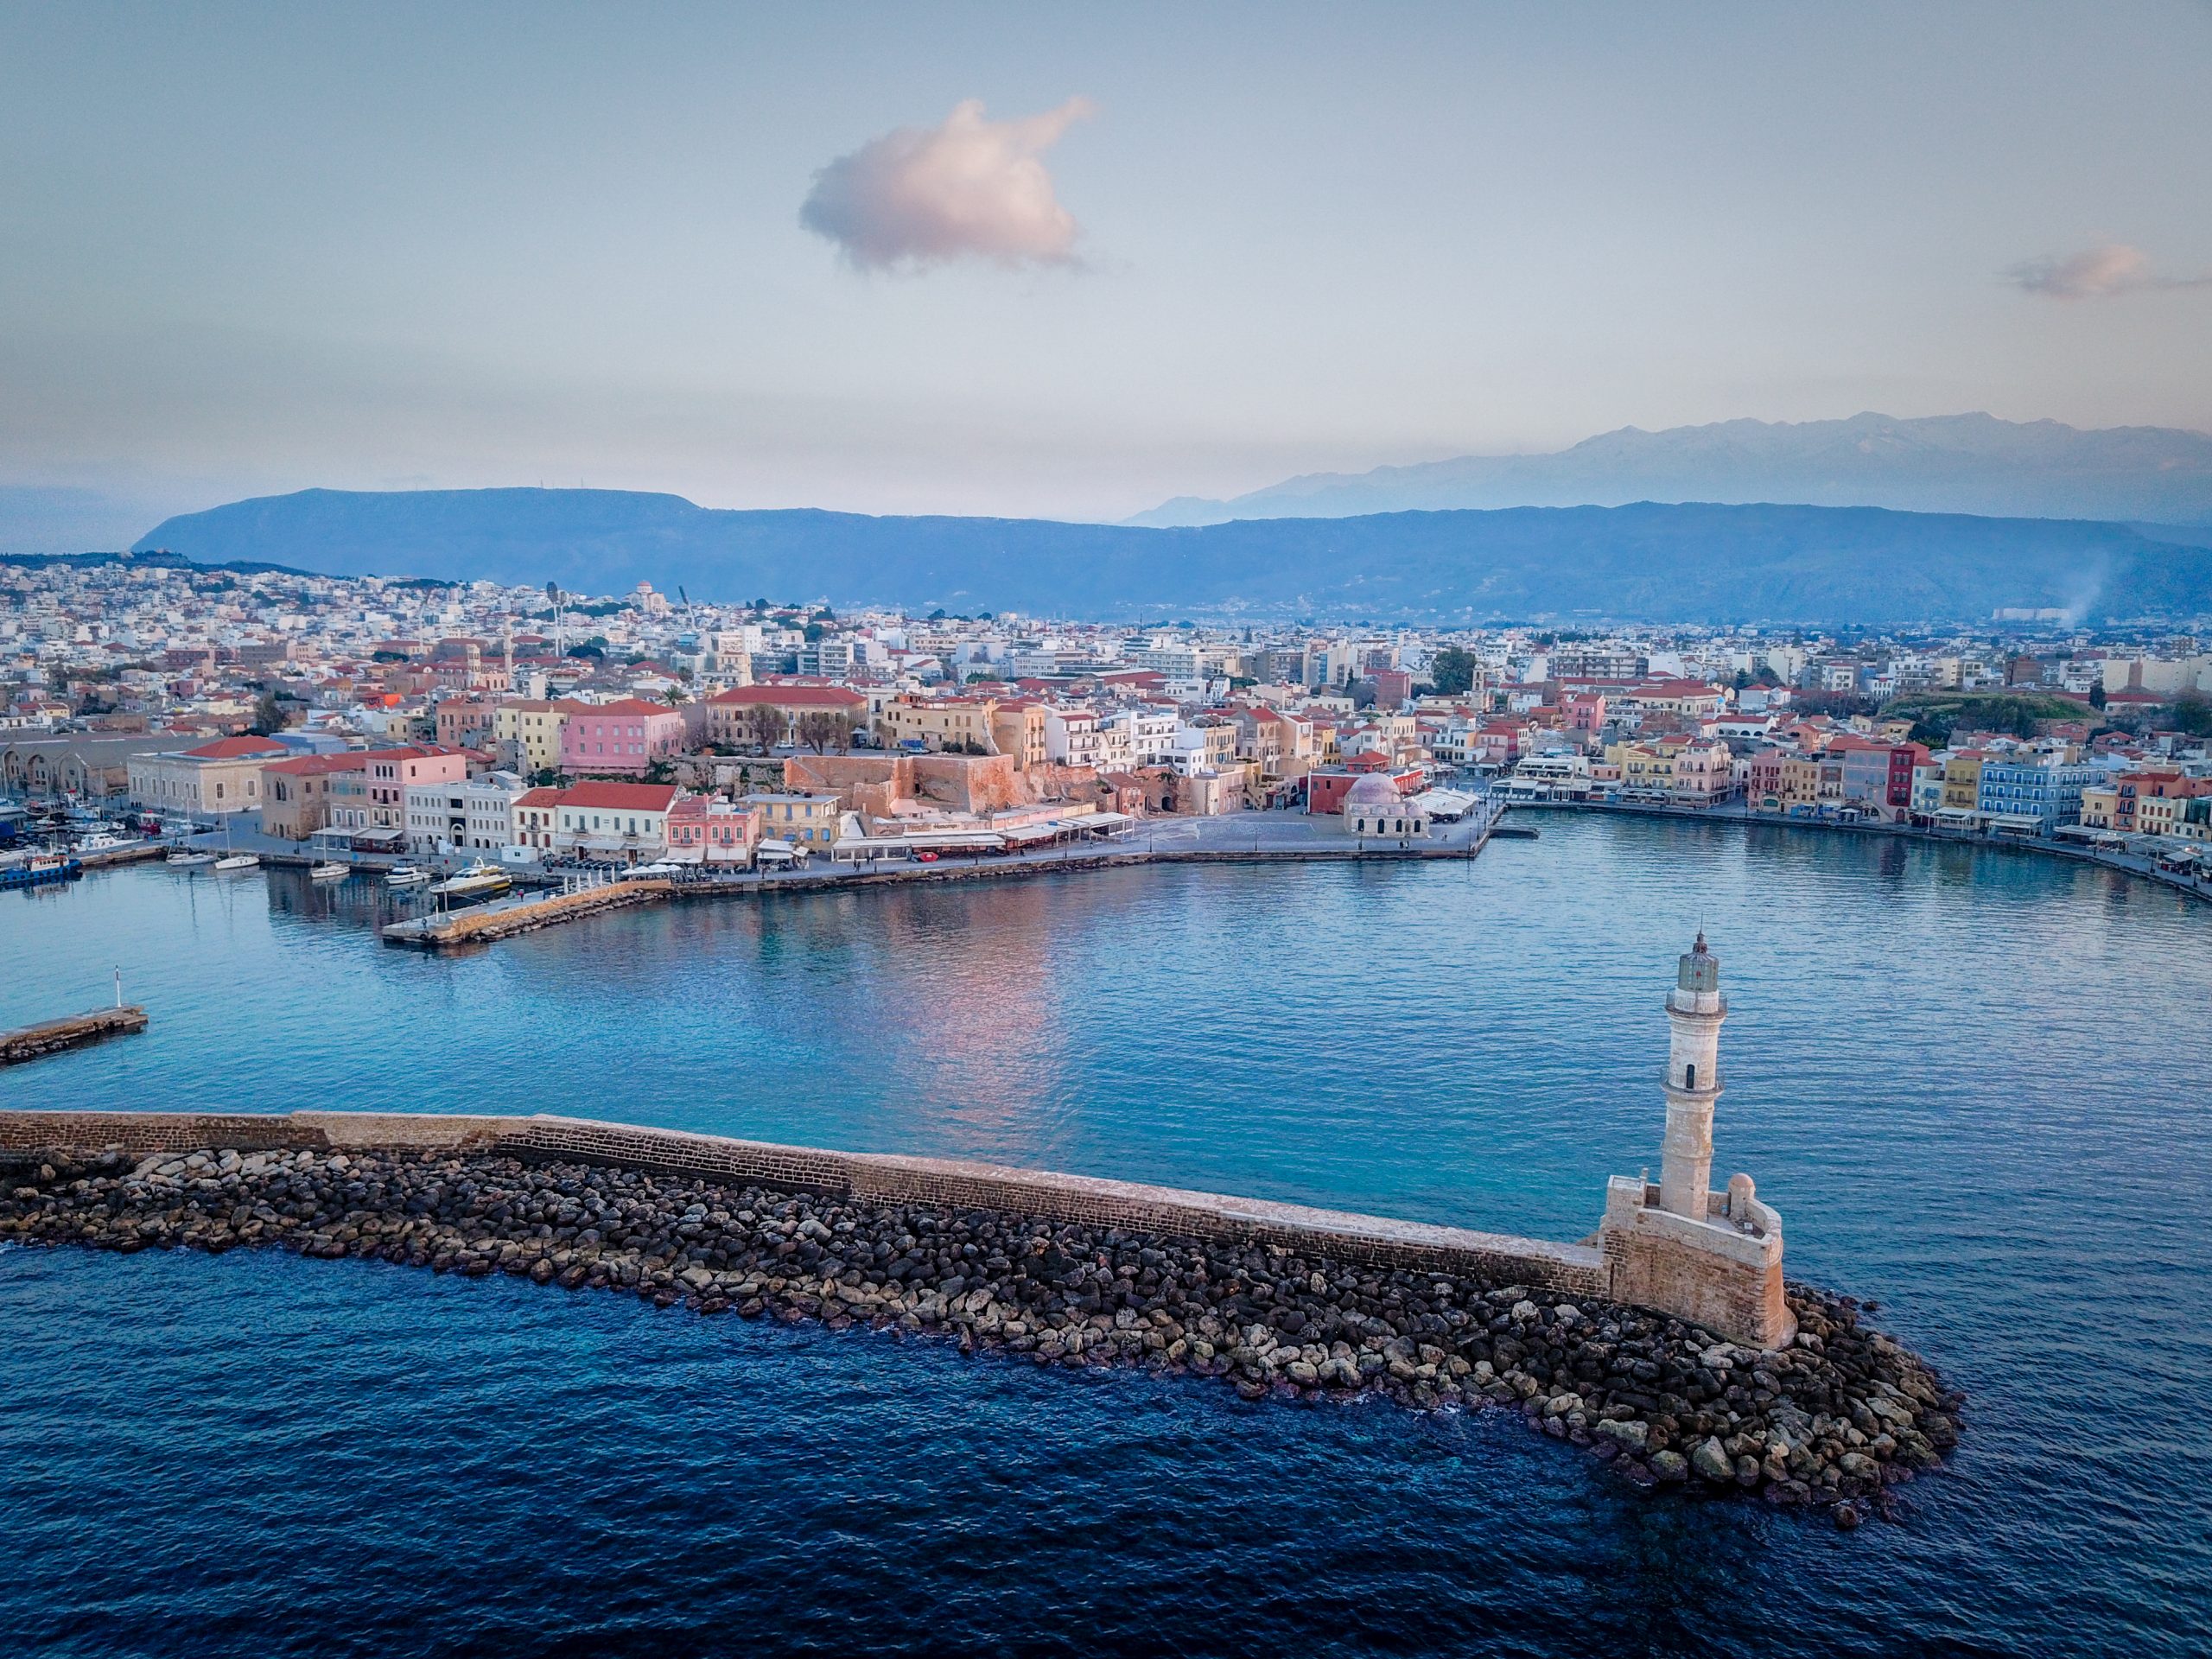 The old Venetian harbour in Chania, Crete, Aerial view